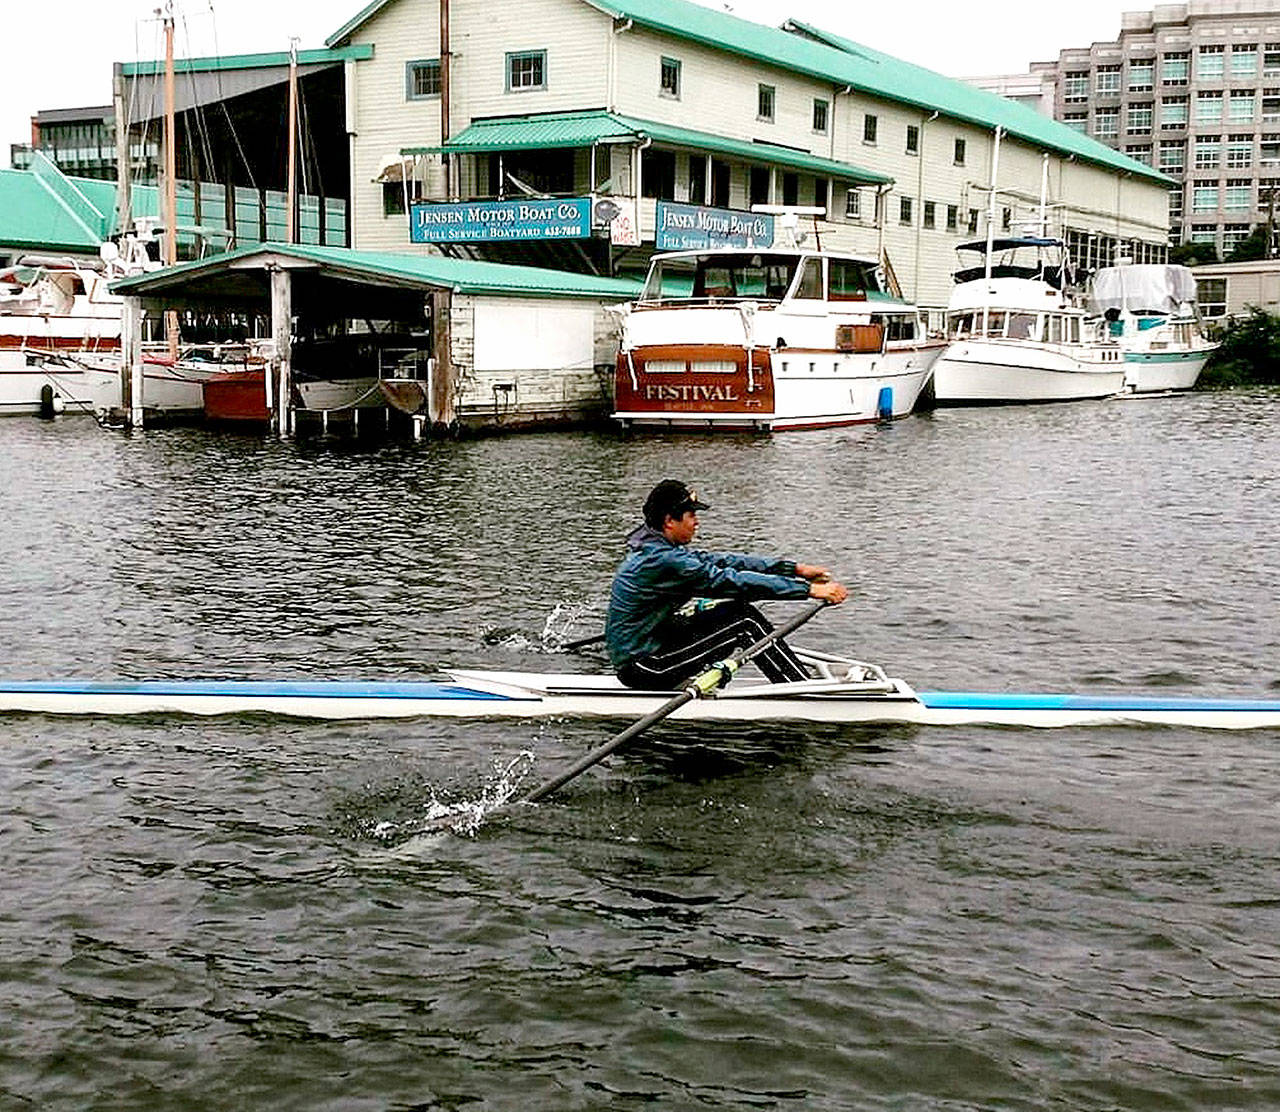 Nathan Mishler, a member of the Olympic Peninsula Rowing Association, will compete at the 2017 World RowingChampionships in Sarasota-Bradenton, Fla., beginning Friday.